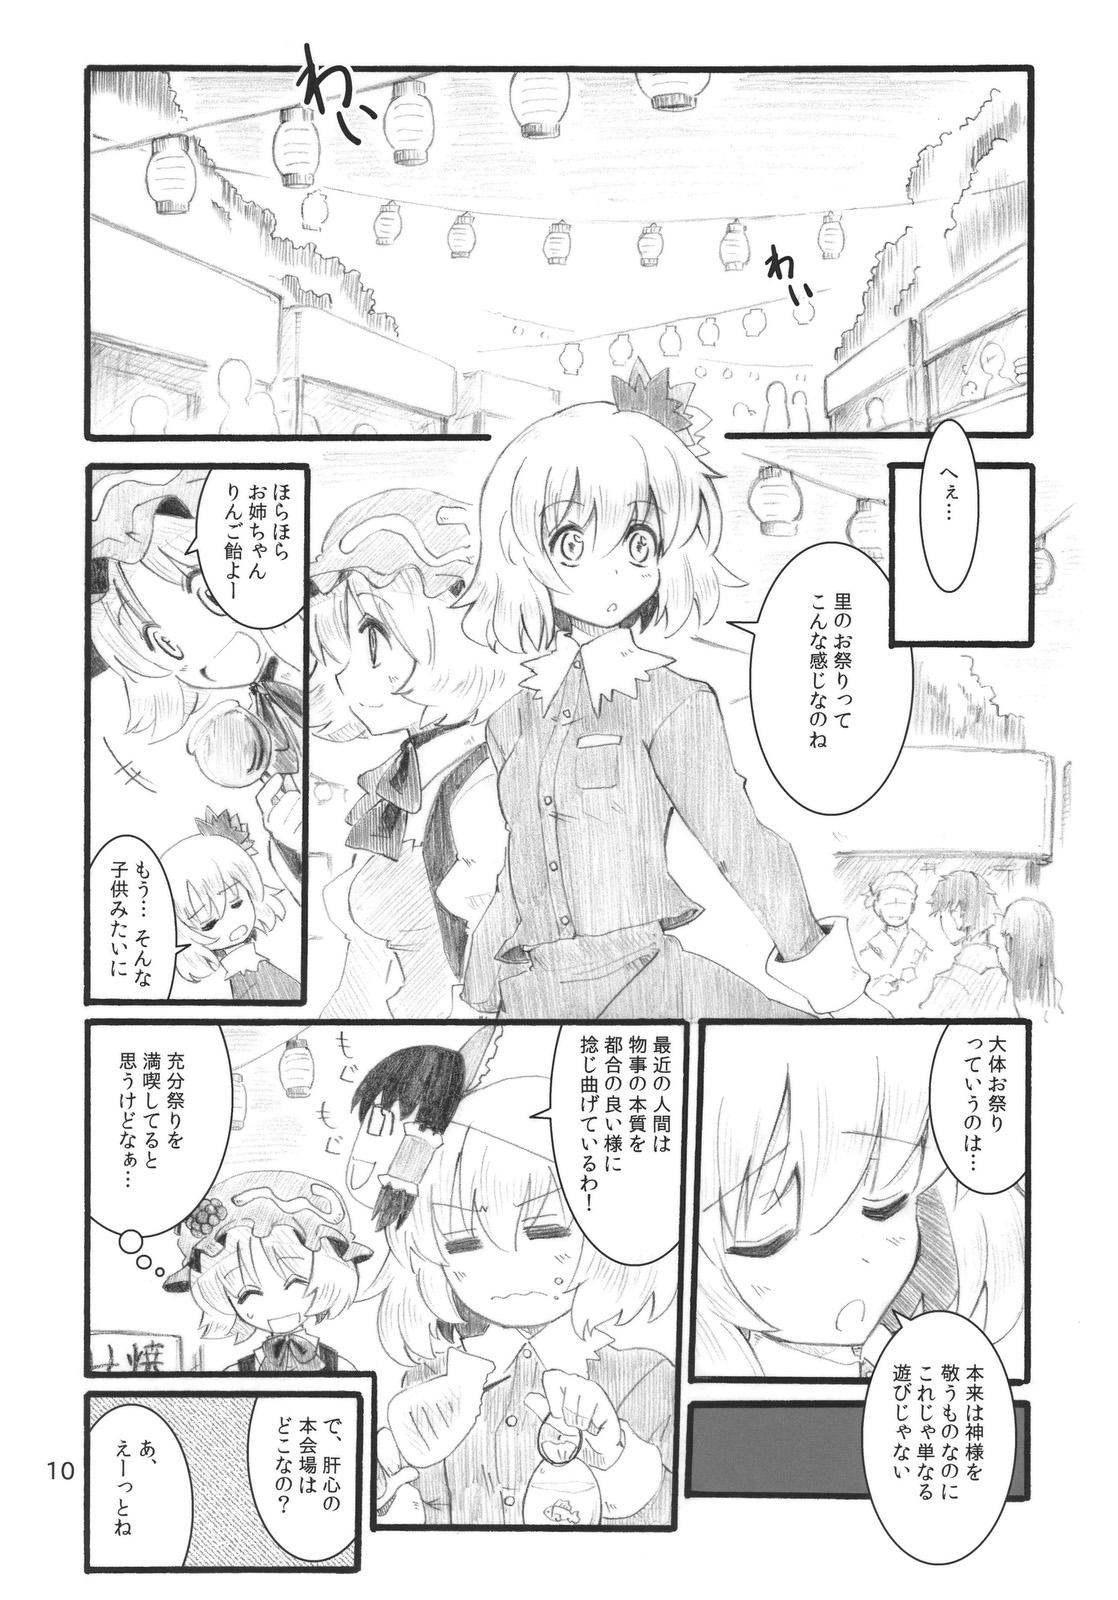 Married Autumn Leaves - Touhou project Stepdad - Page 10